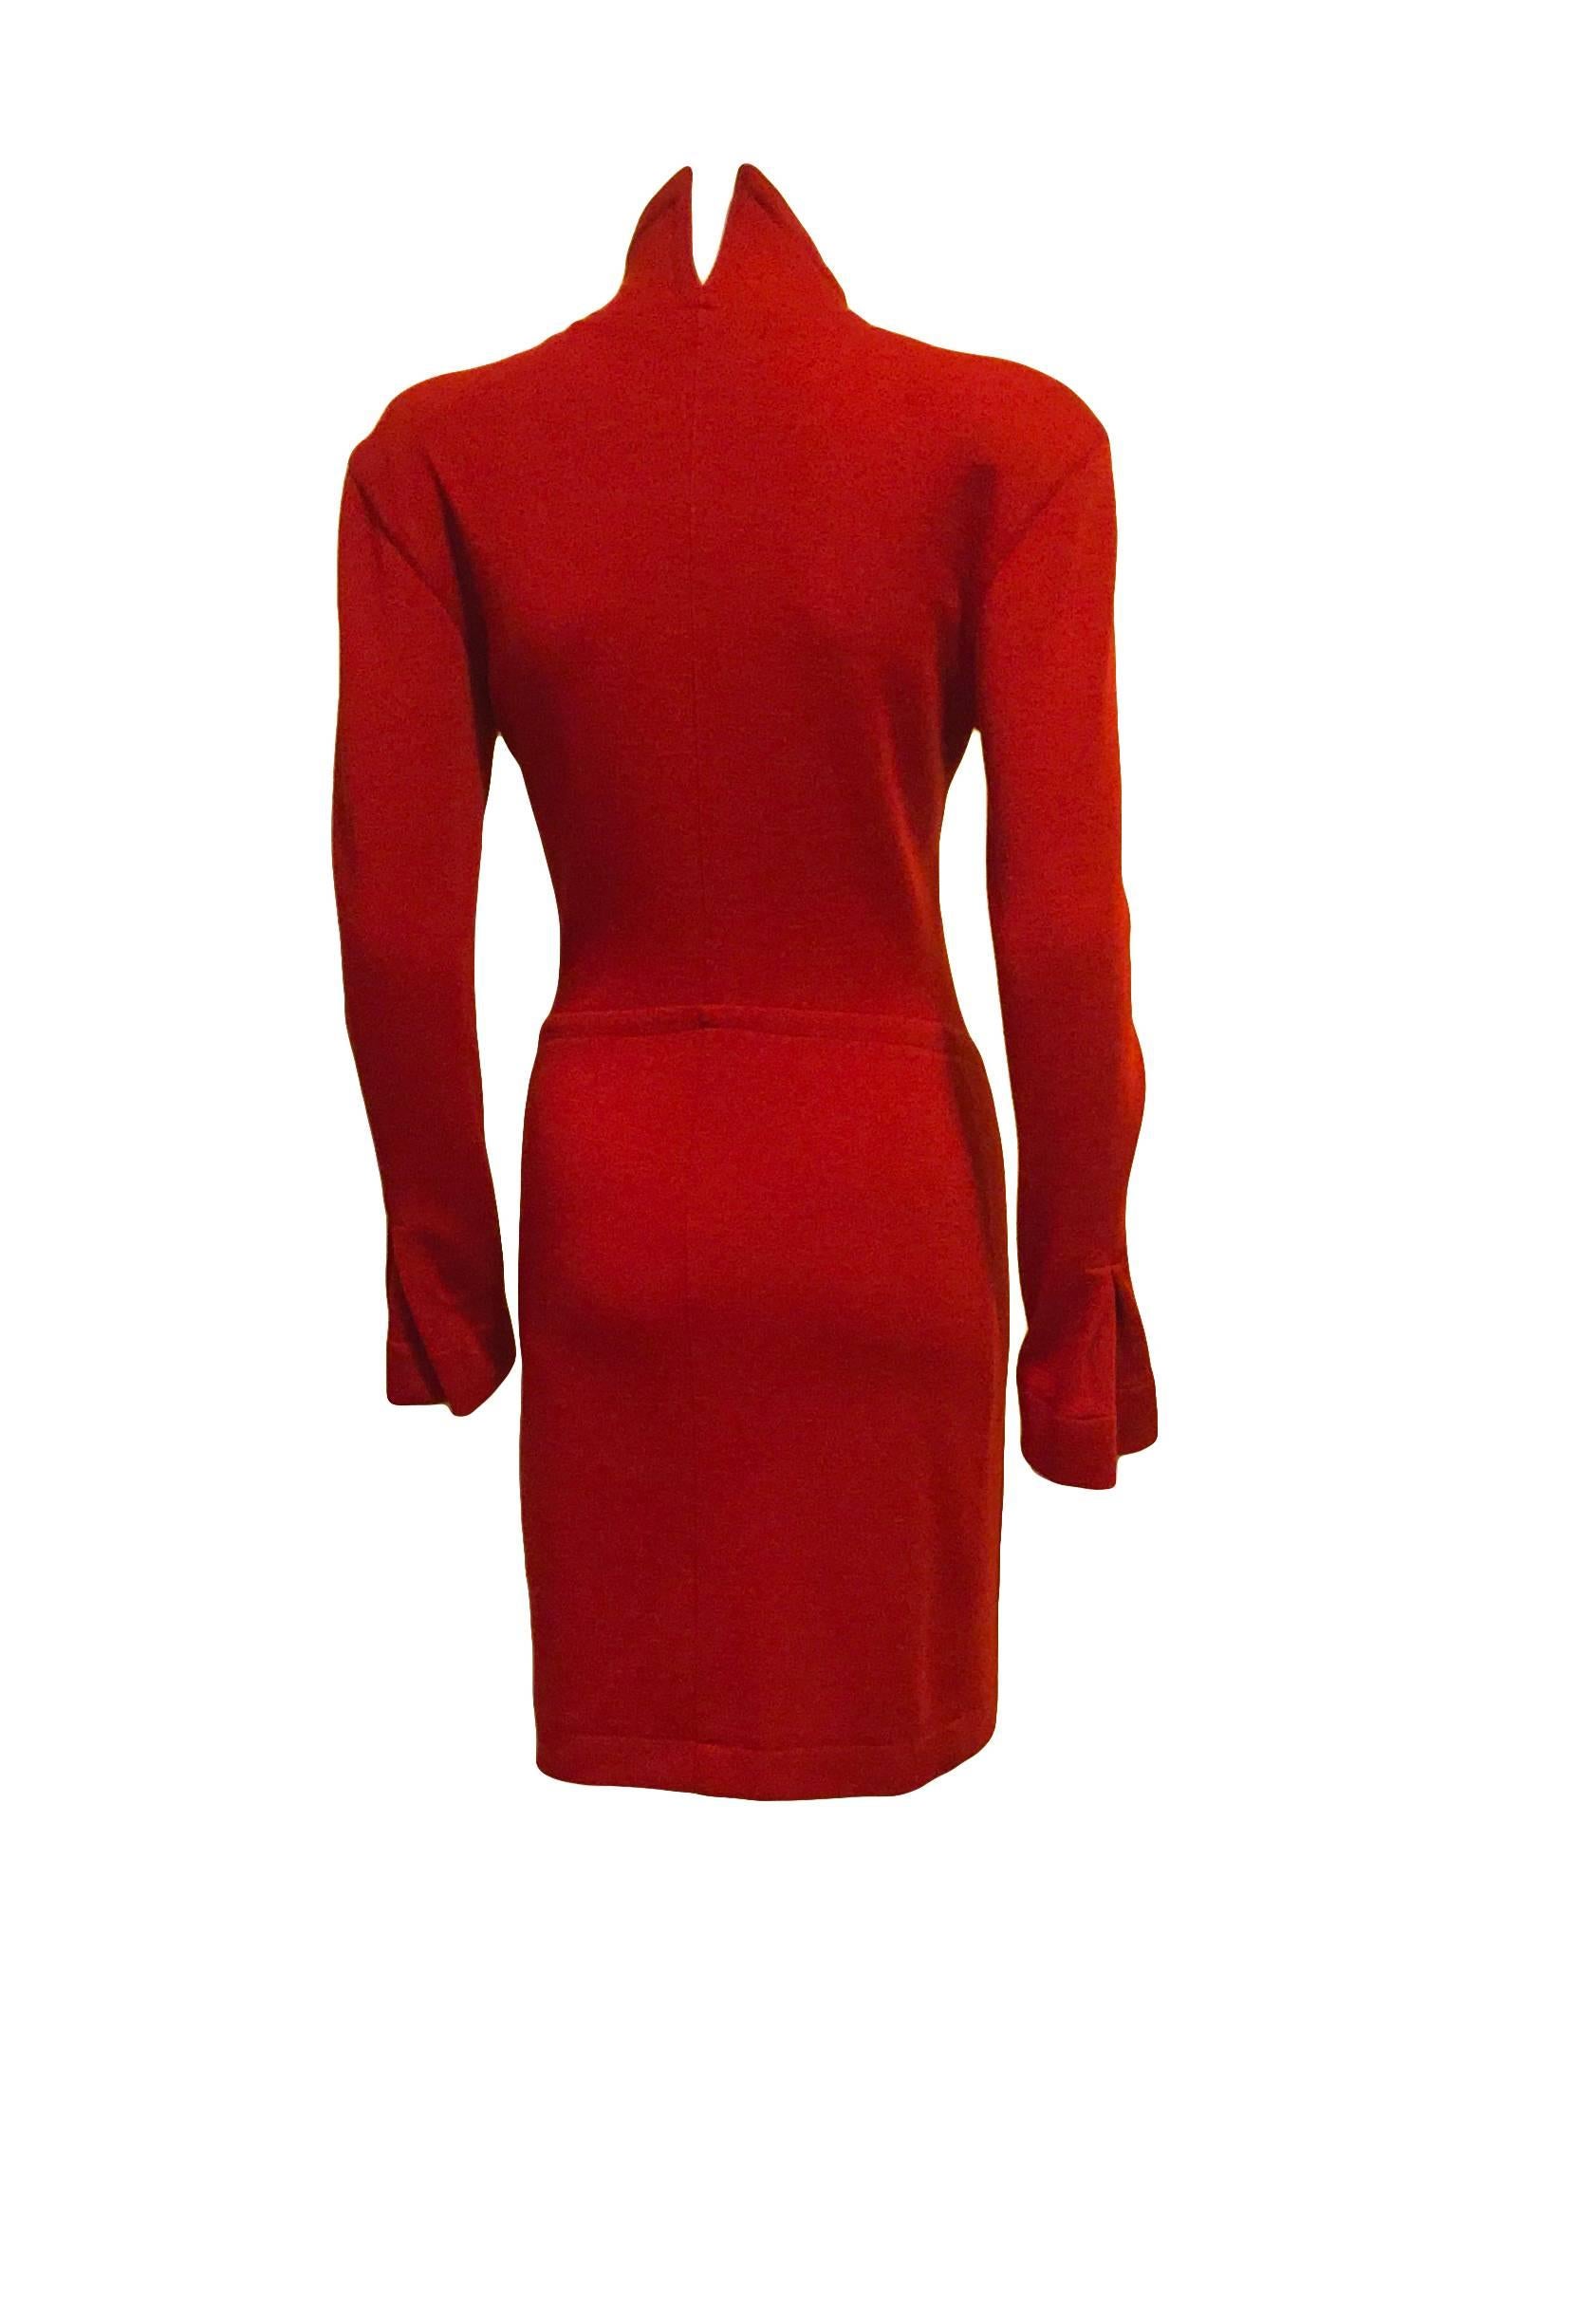 Deep red Claude Montana wool bodycon dress with front zipper at neckline and pocket at front, bell sleeves, slim shoulder pads, architectural collar, and terrific seams throughout emphasizing the shape of the dress.